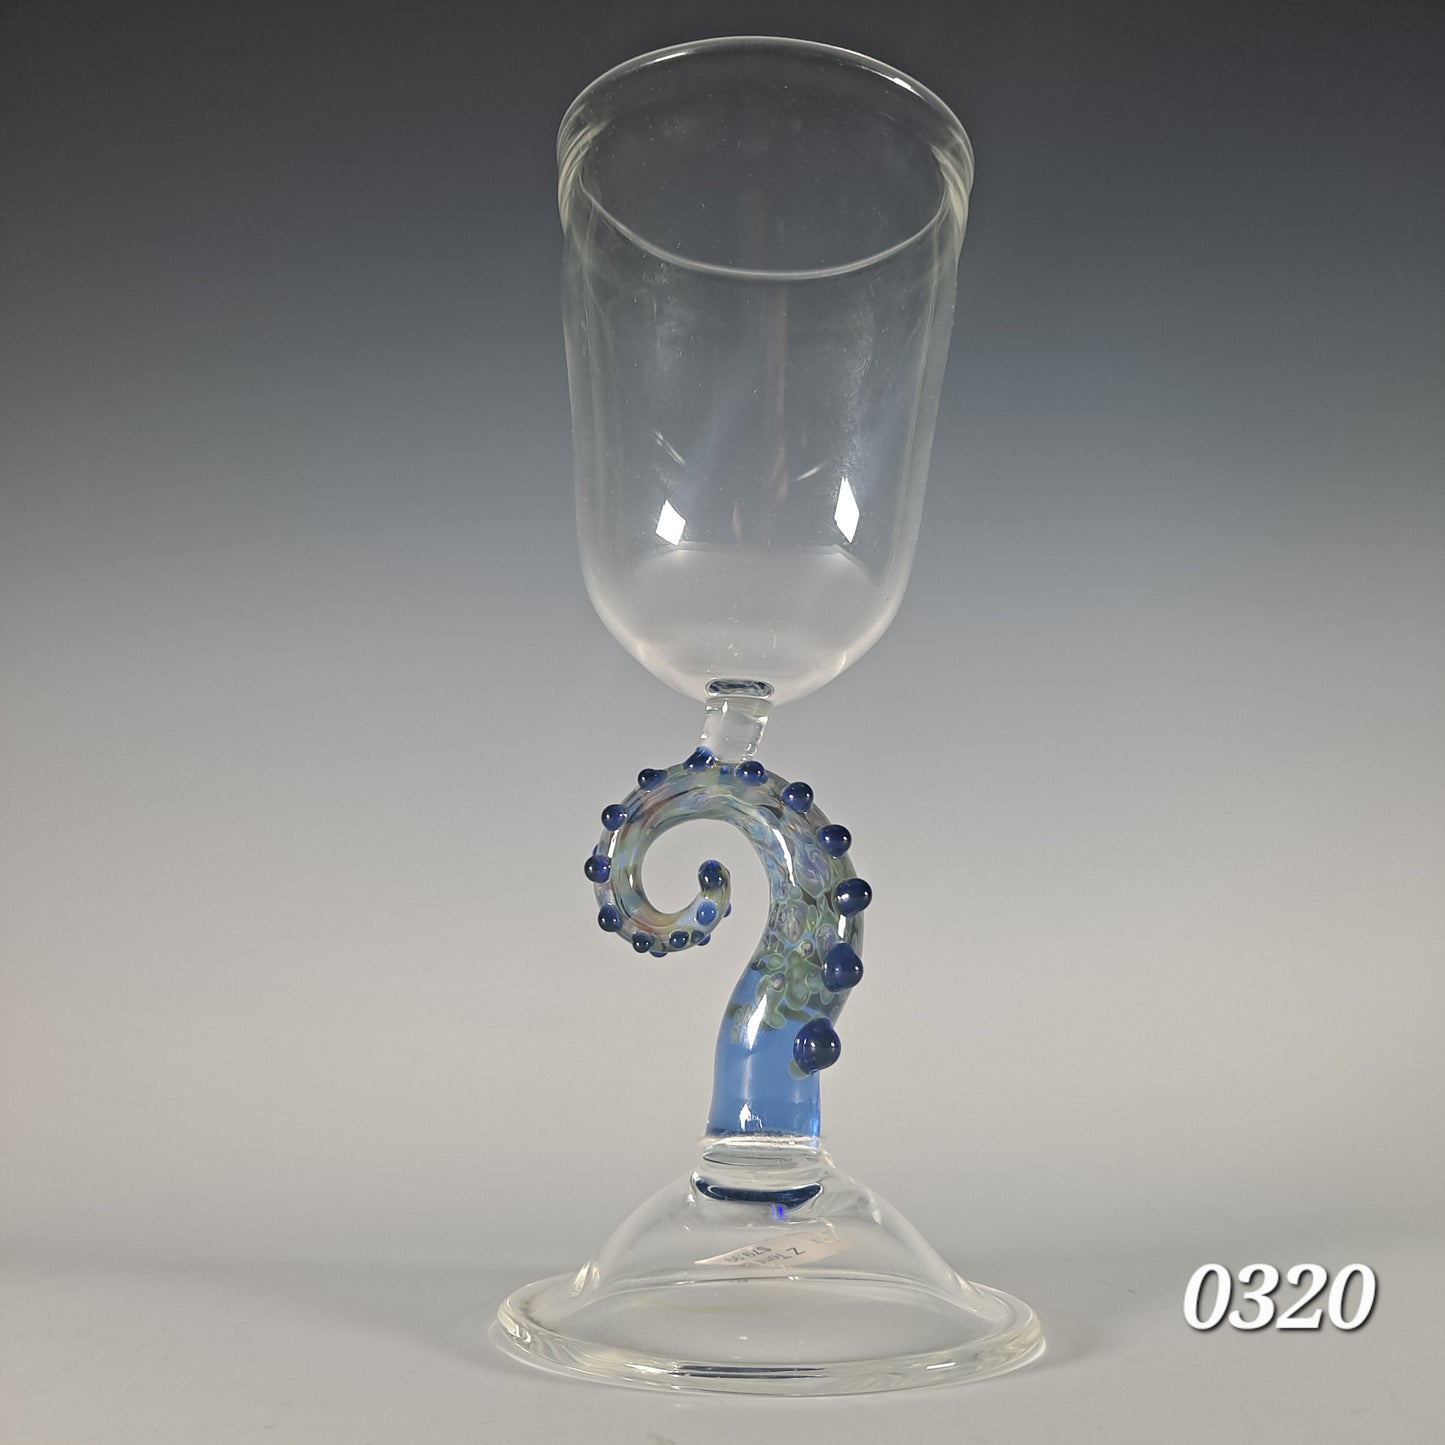 Octopus Drinkware, Cups, Wine glasses, and Mugs